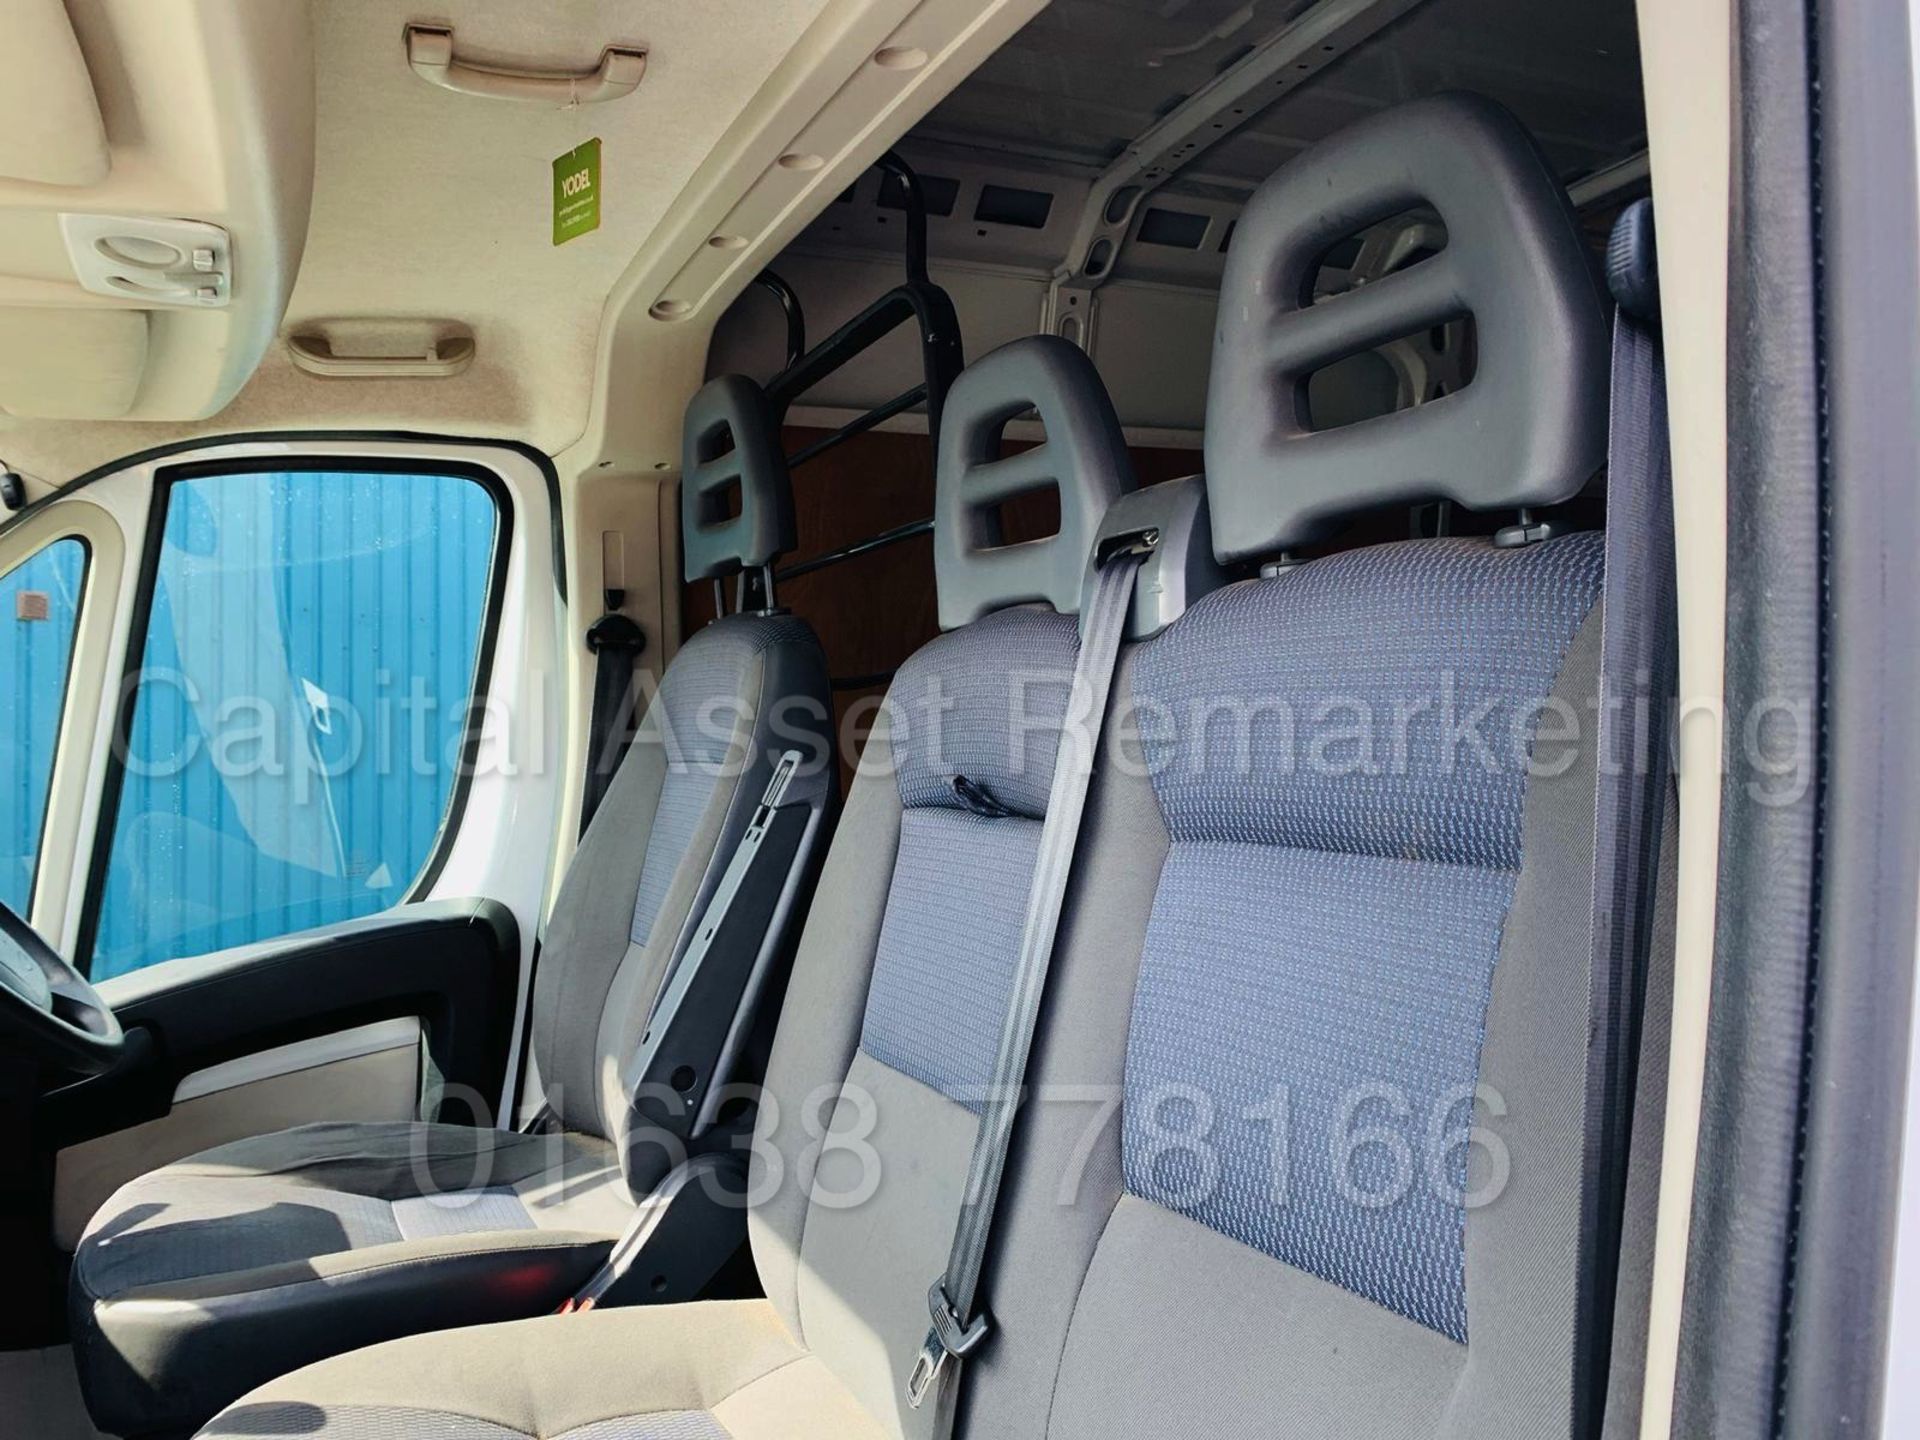 CITROEN RELAY 'L4 EXTRA LWB HI-ROOF' (2012) '2.2 HDI - 130 BHP - 6 SPEED' **LOW MILES** - Image 12 of 21